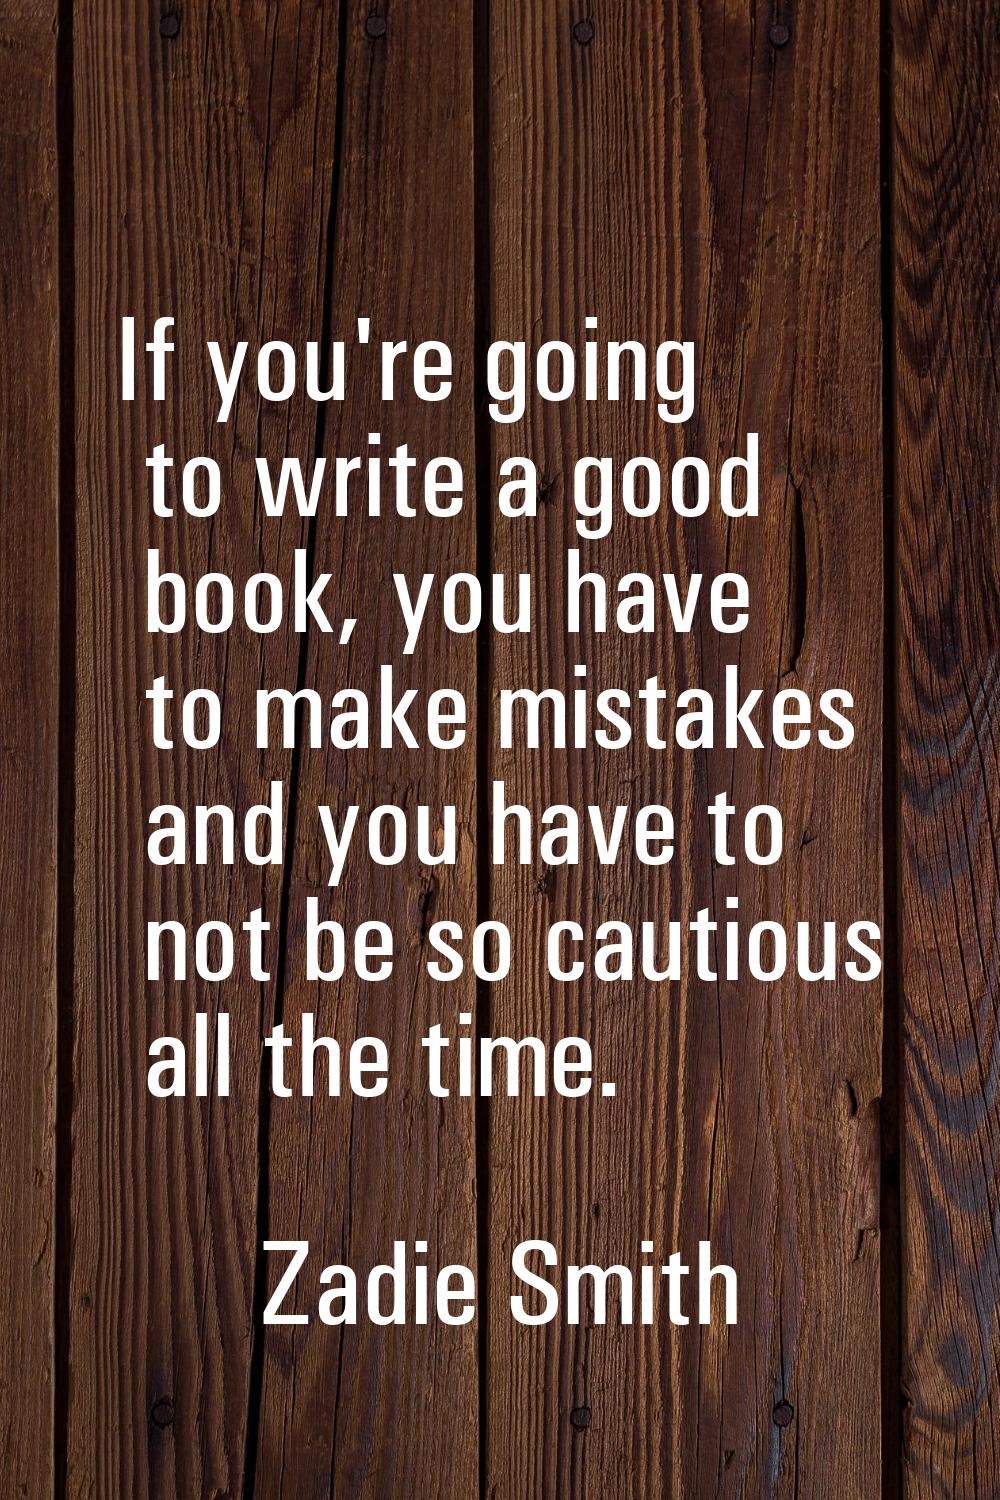 If you're going to write a good book, you have to make mistakes and you have to not be so cautious 